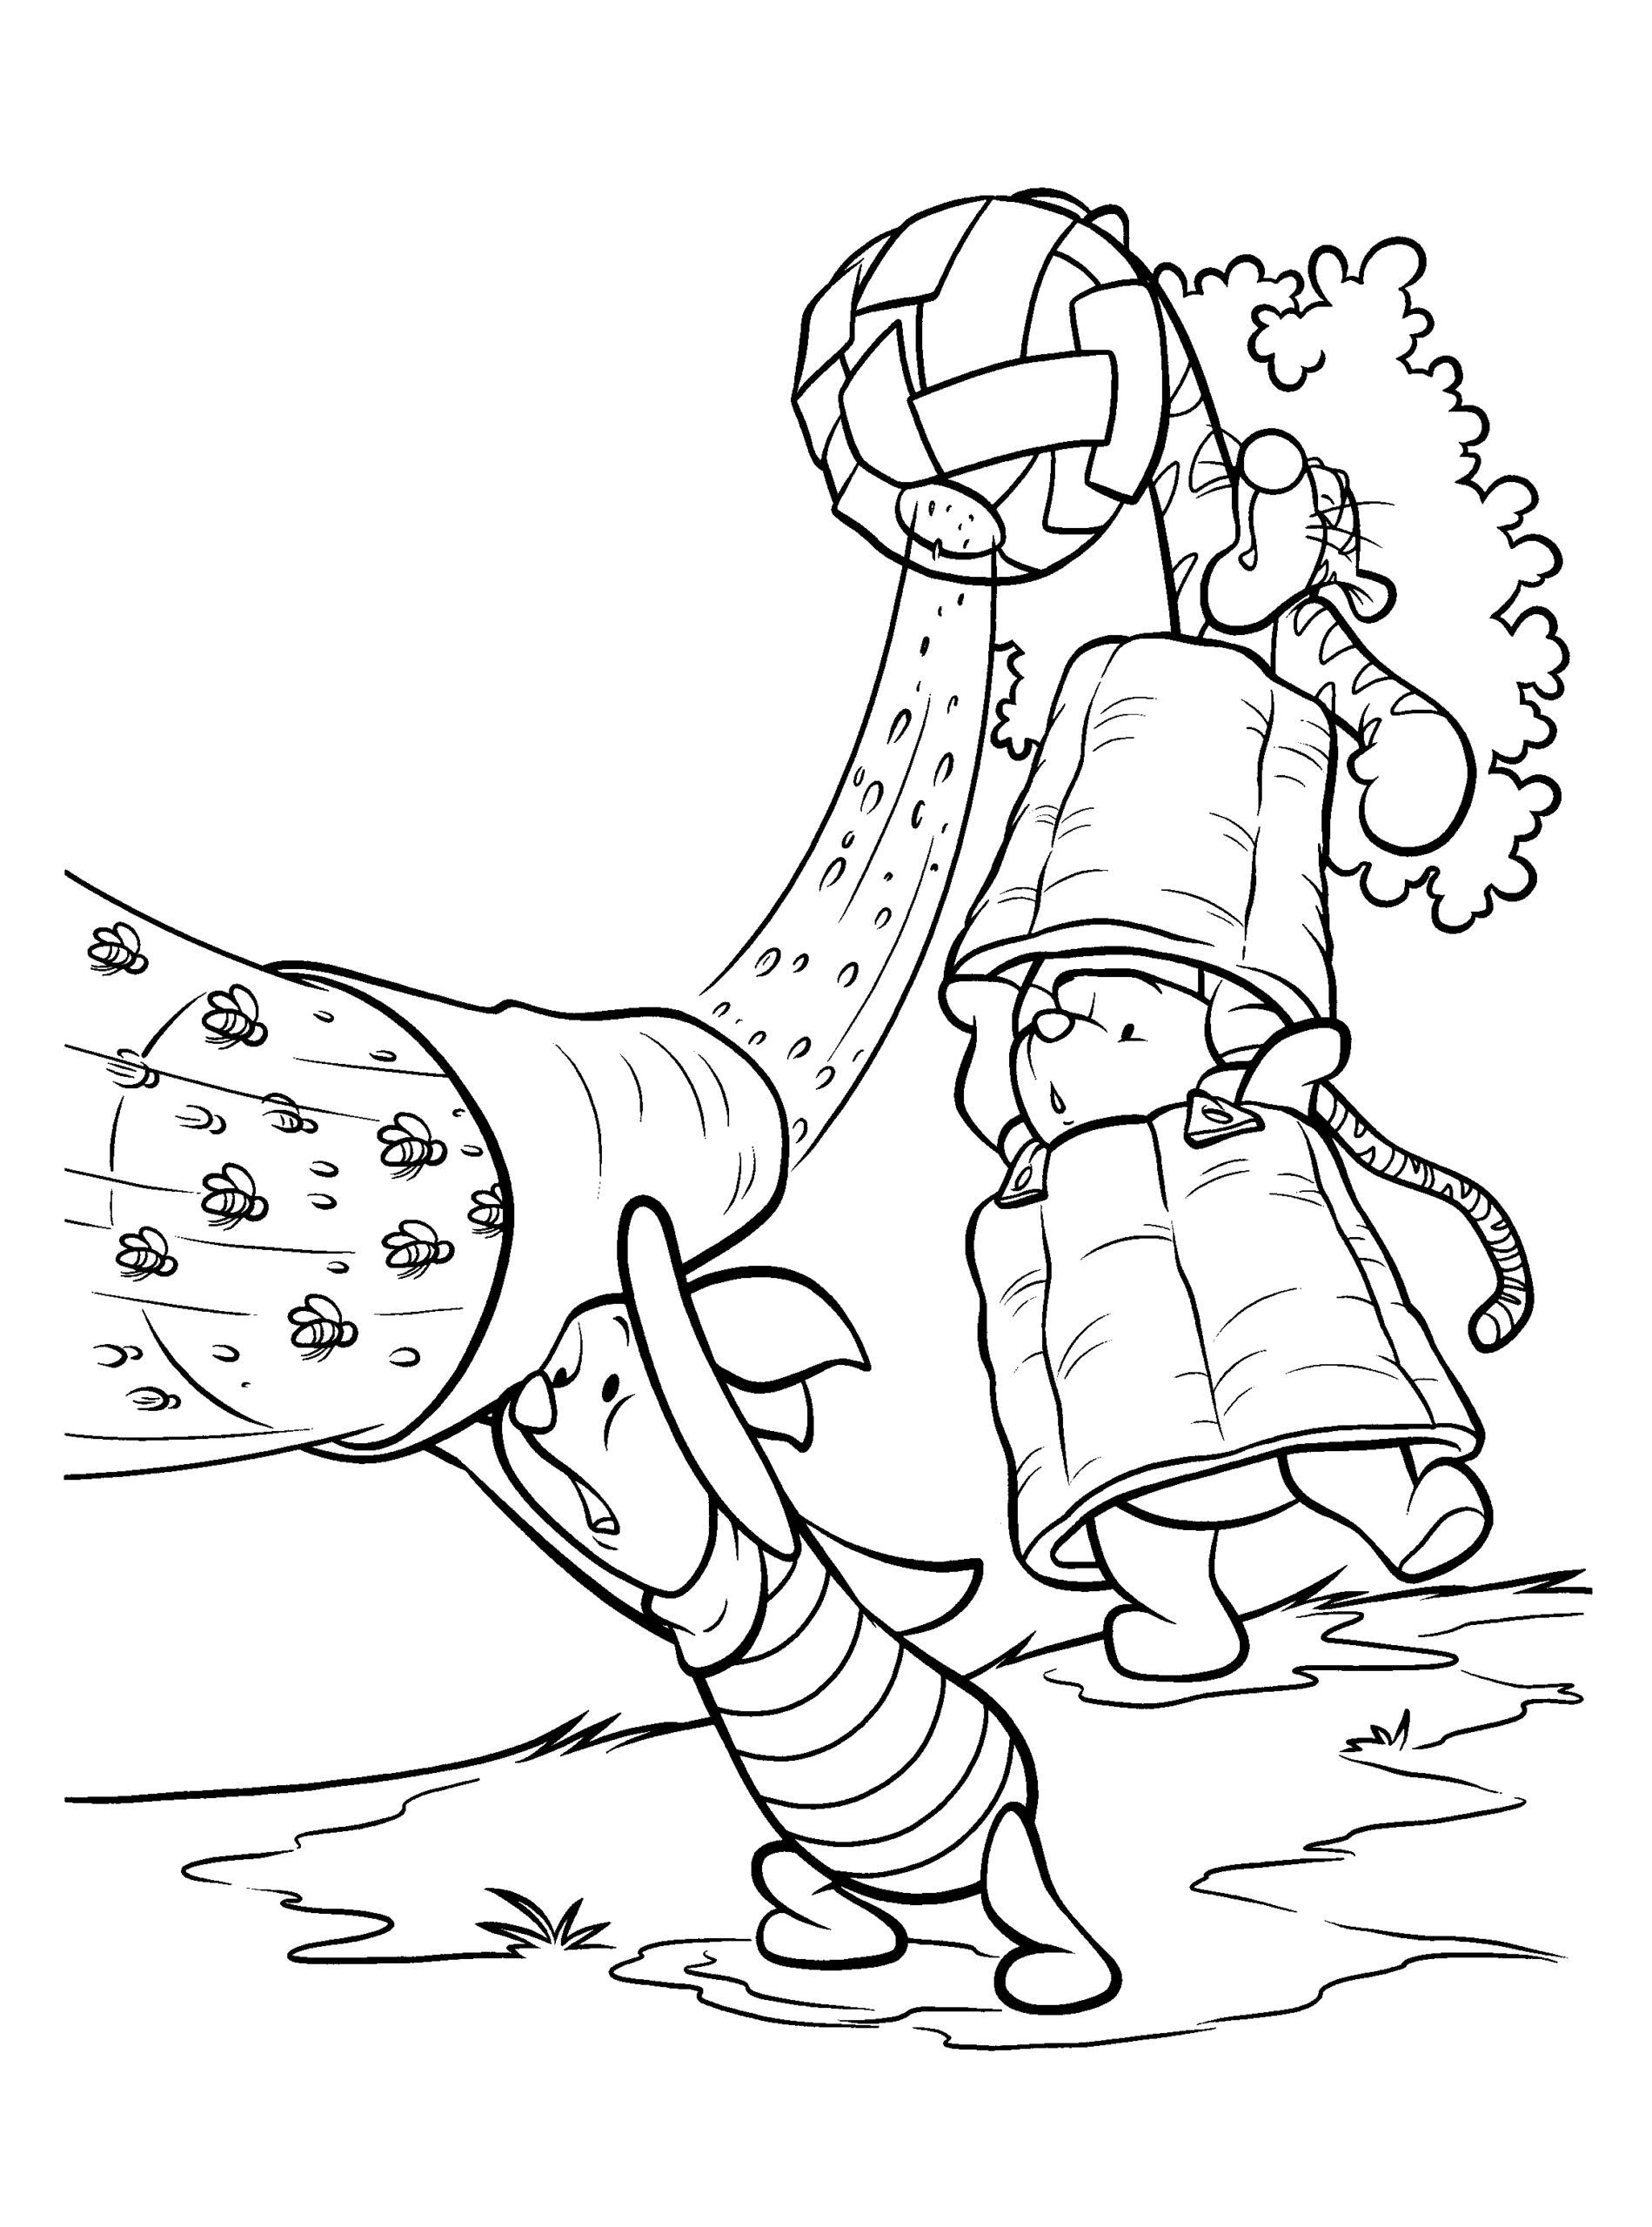 Winnie the Pooh Coloring Pages Cartoons winnie the pooh 29 Printable 2020 7131 Coloring4free